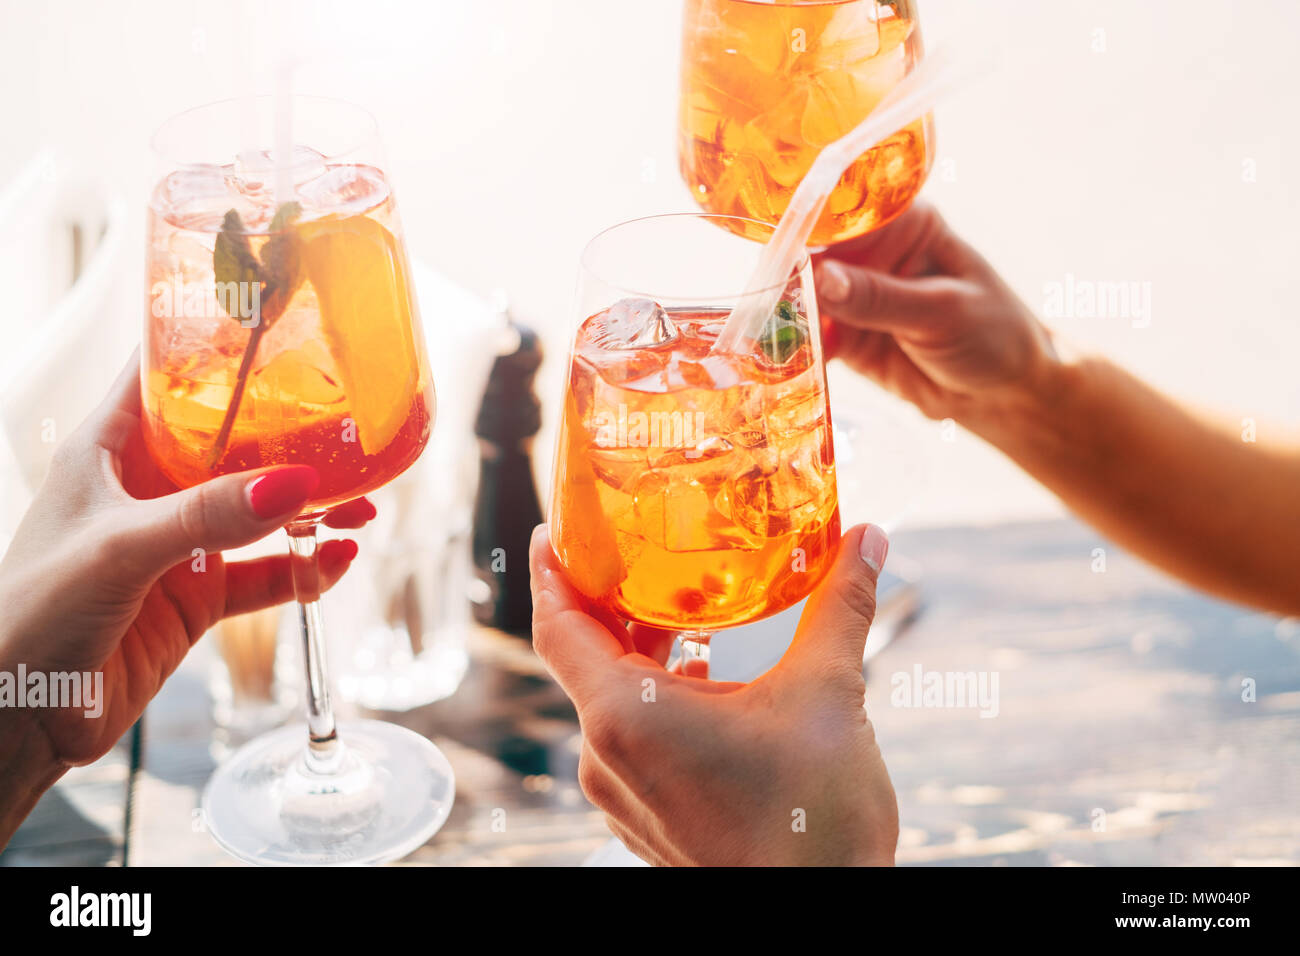 Three women making a celebratory toast with aperol spritz cocktails Stock Photo